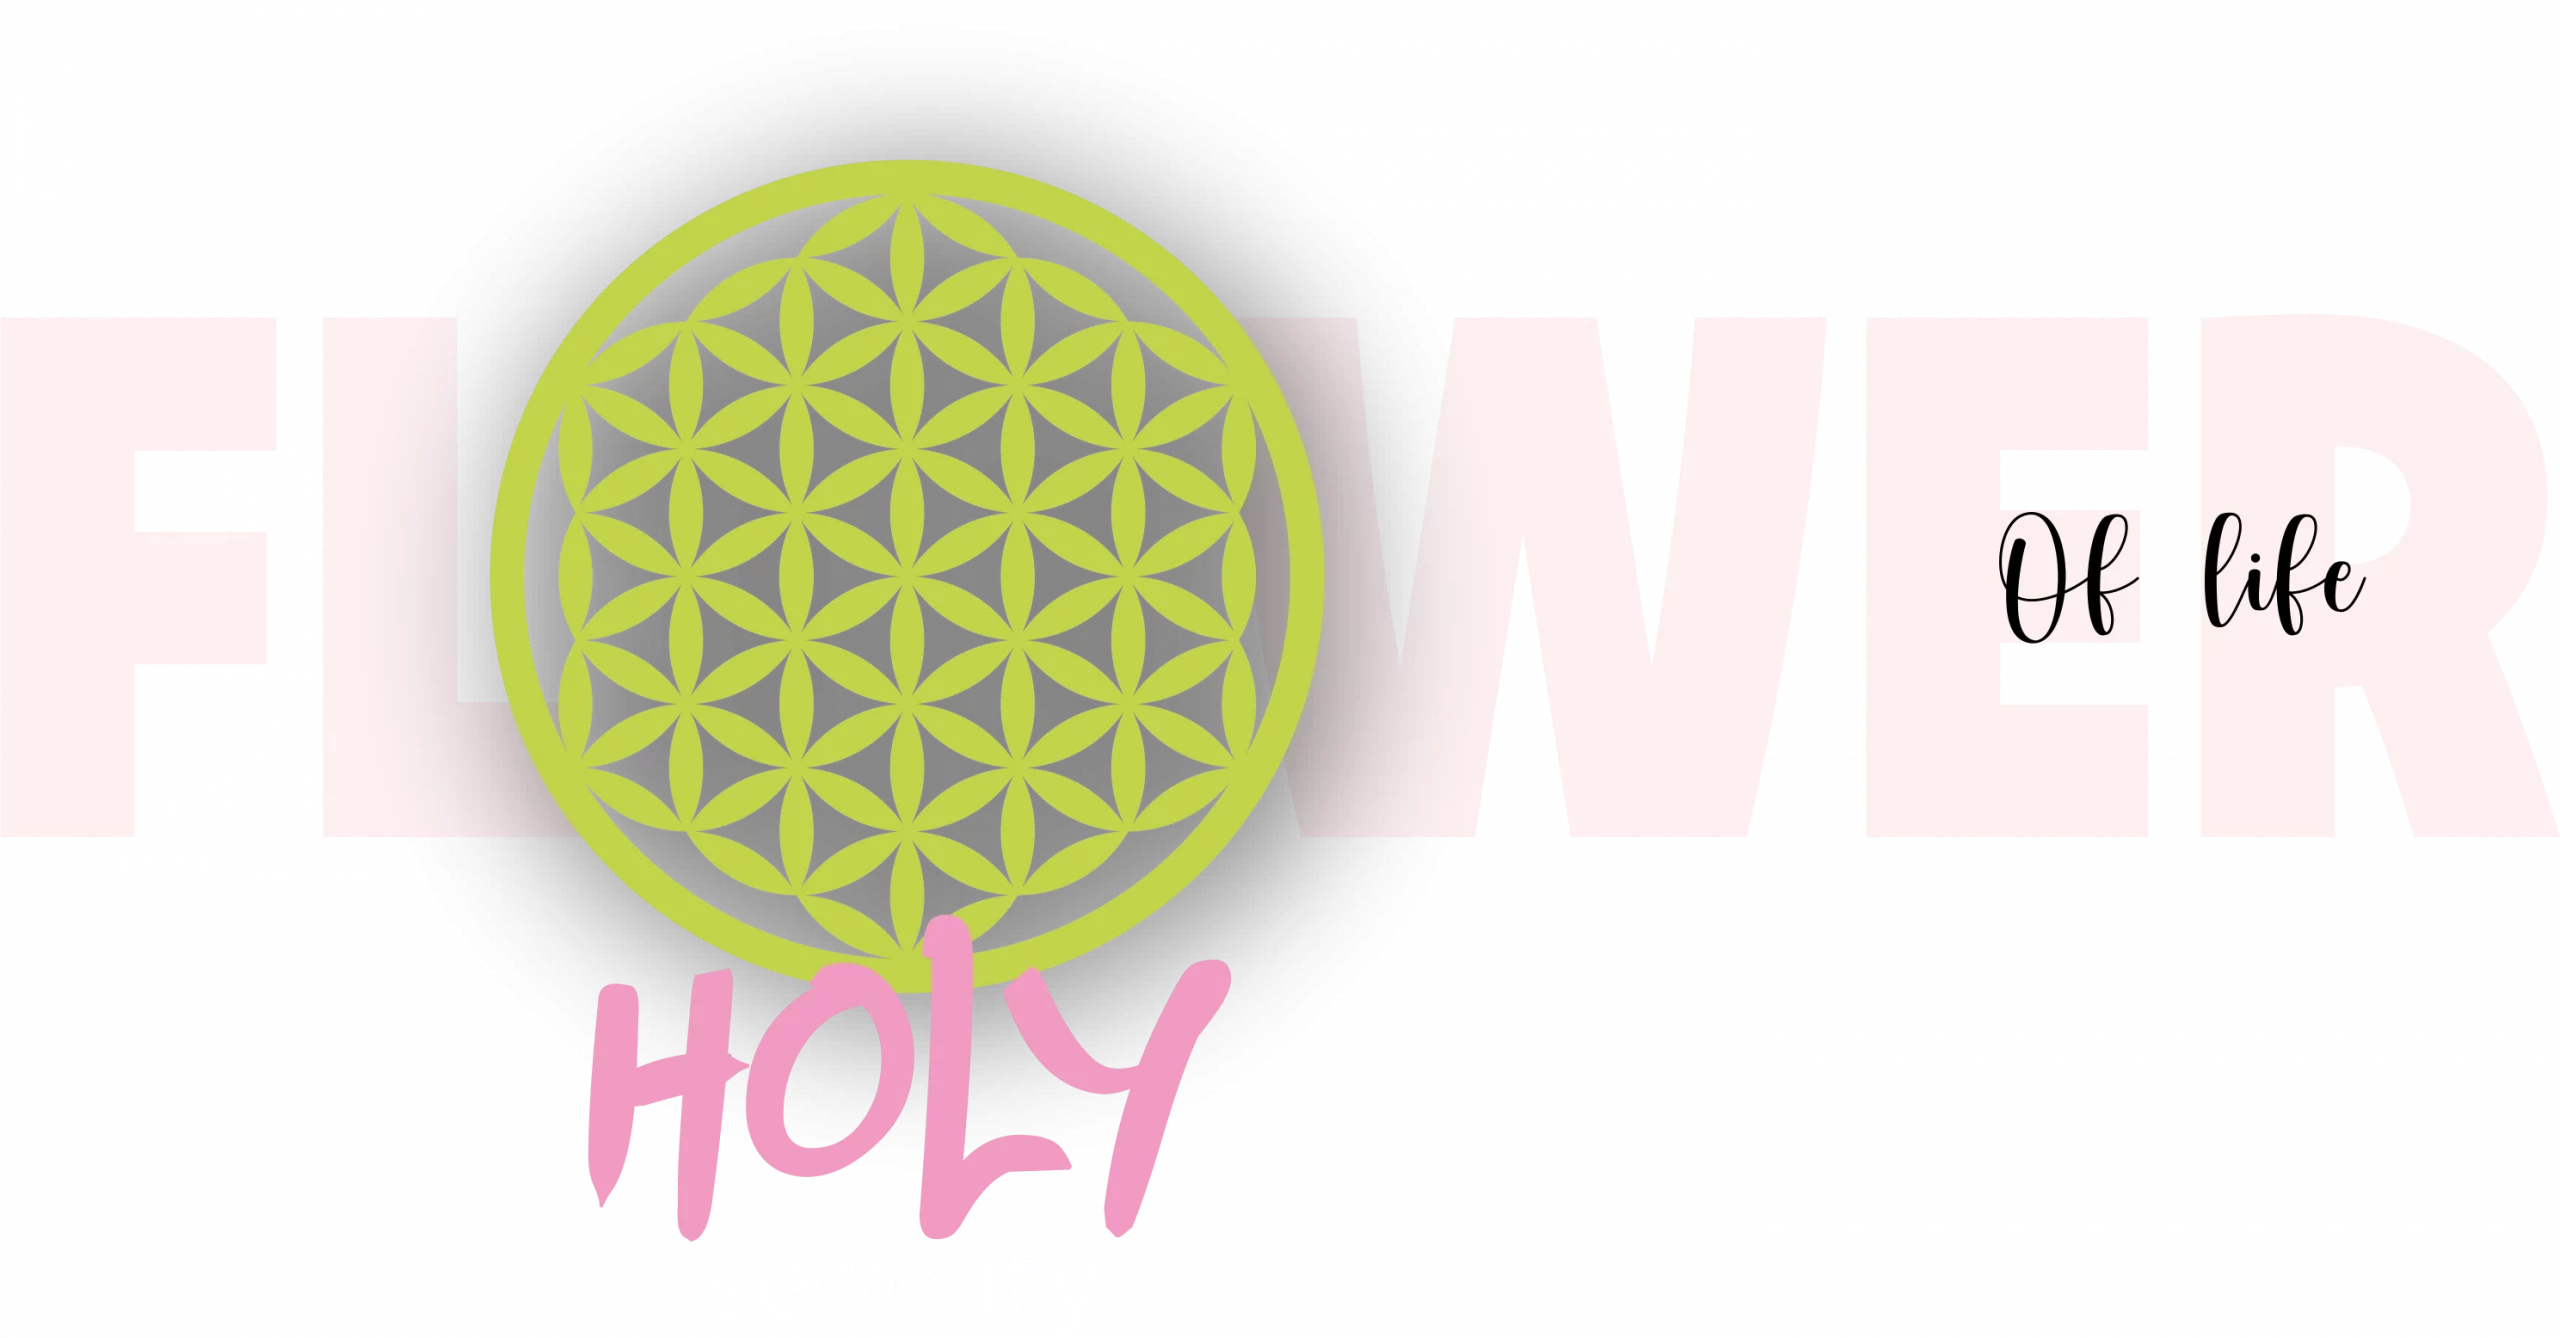 accueil FLOWER of life holyserenity